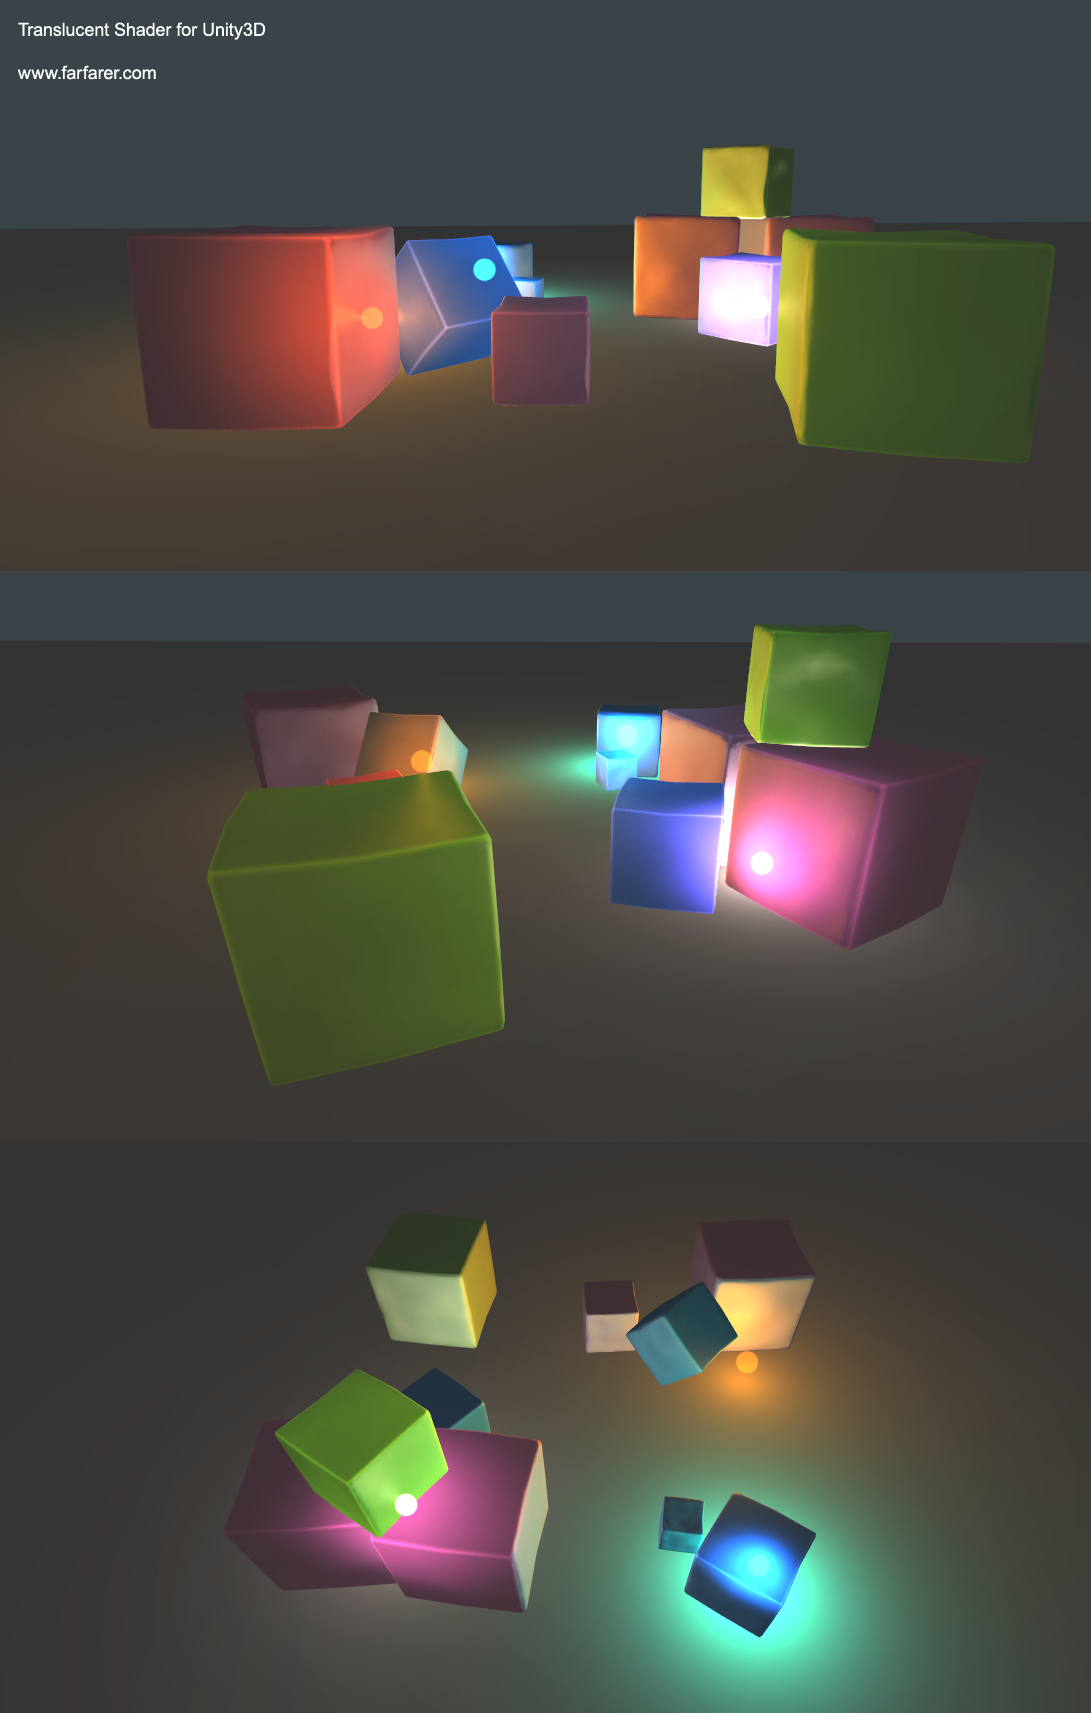 translucent shader for unity3d